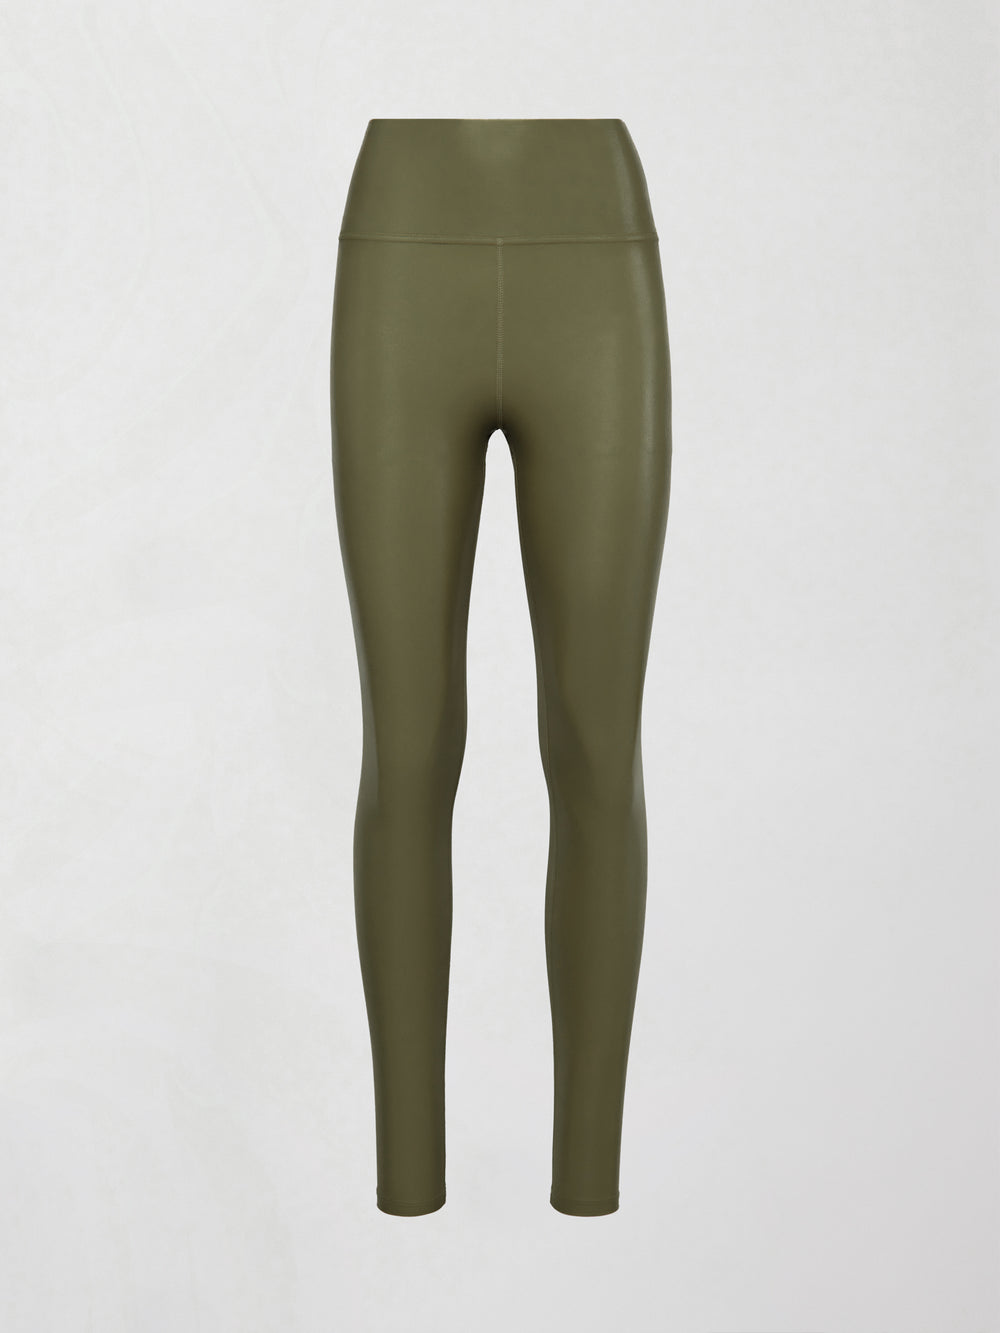 High Shine 7/8th Side Pocket Legging in Muted Olive Cire